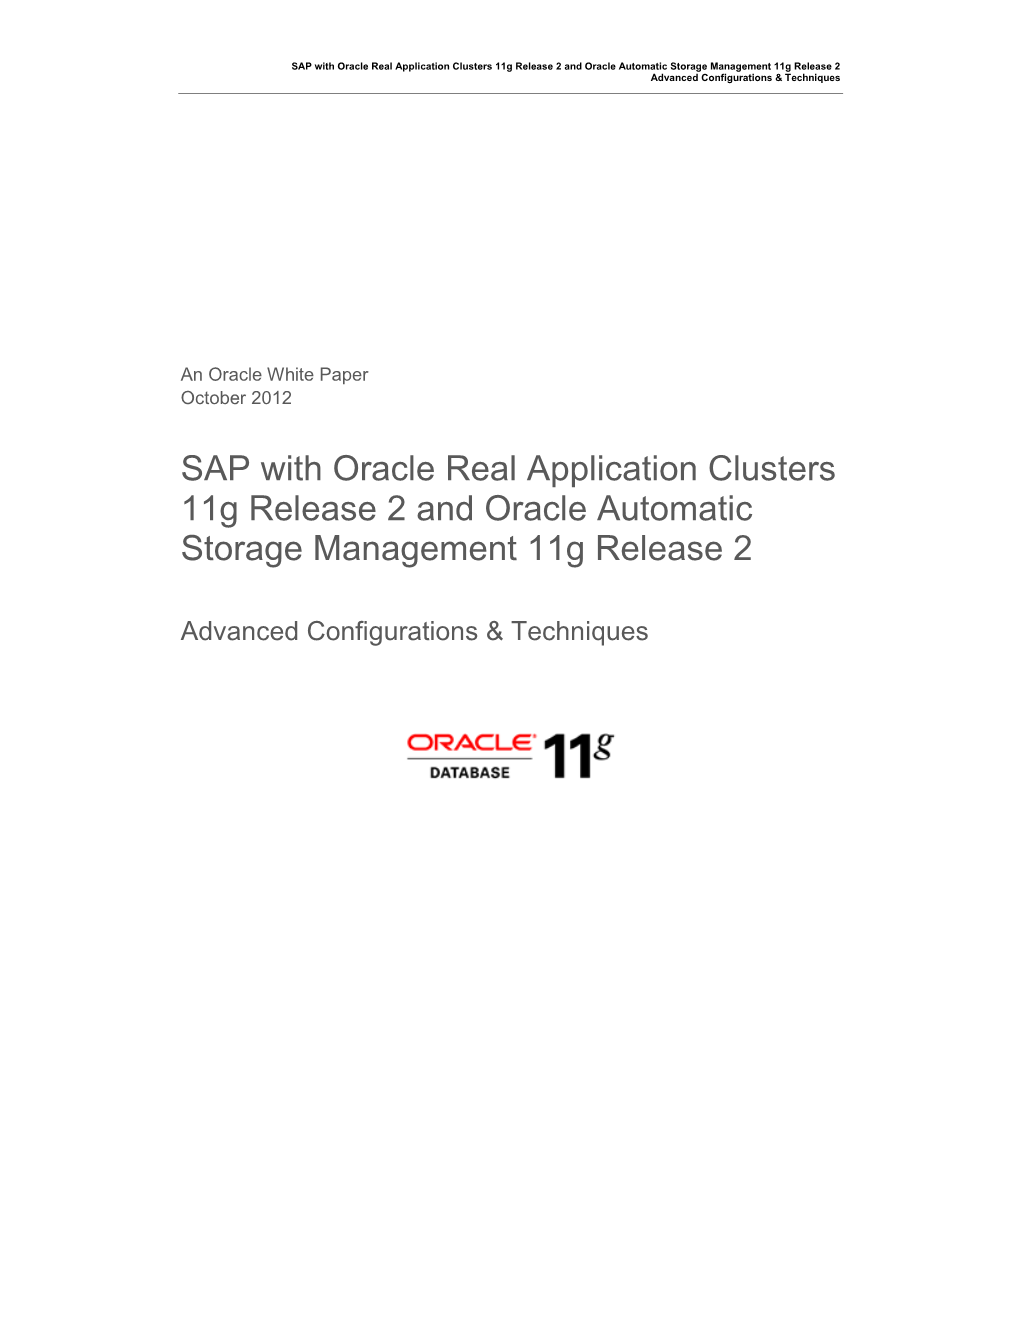 SAP with Oracle Real Application Clusters 11G and Oracle Automatic